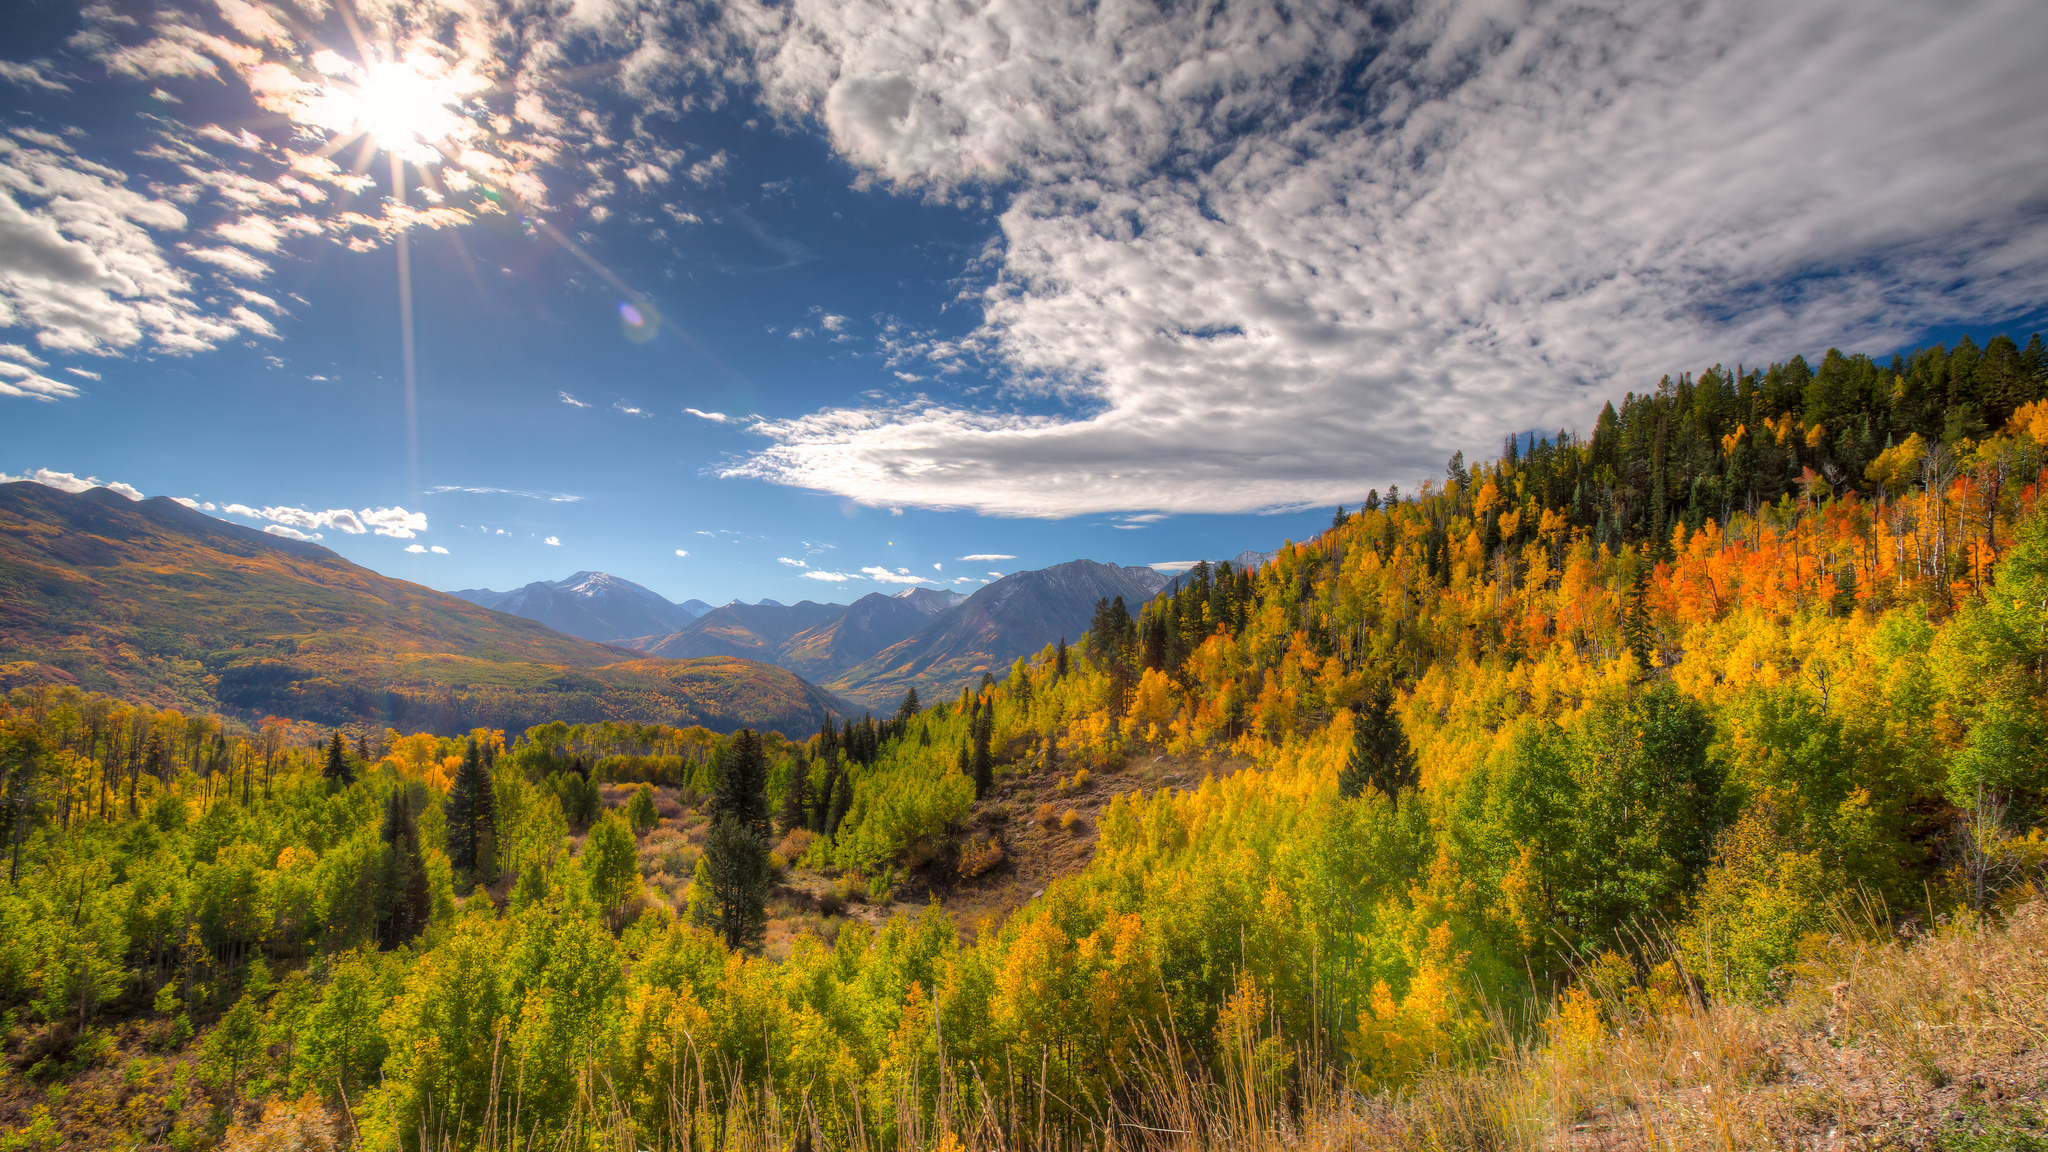 Experience Autumn in the Rockies: Behold the Quaking Aspen